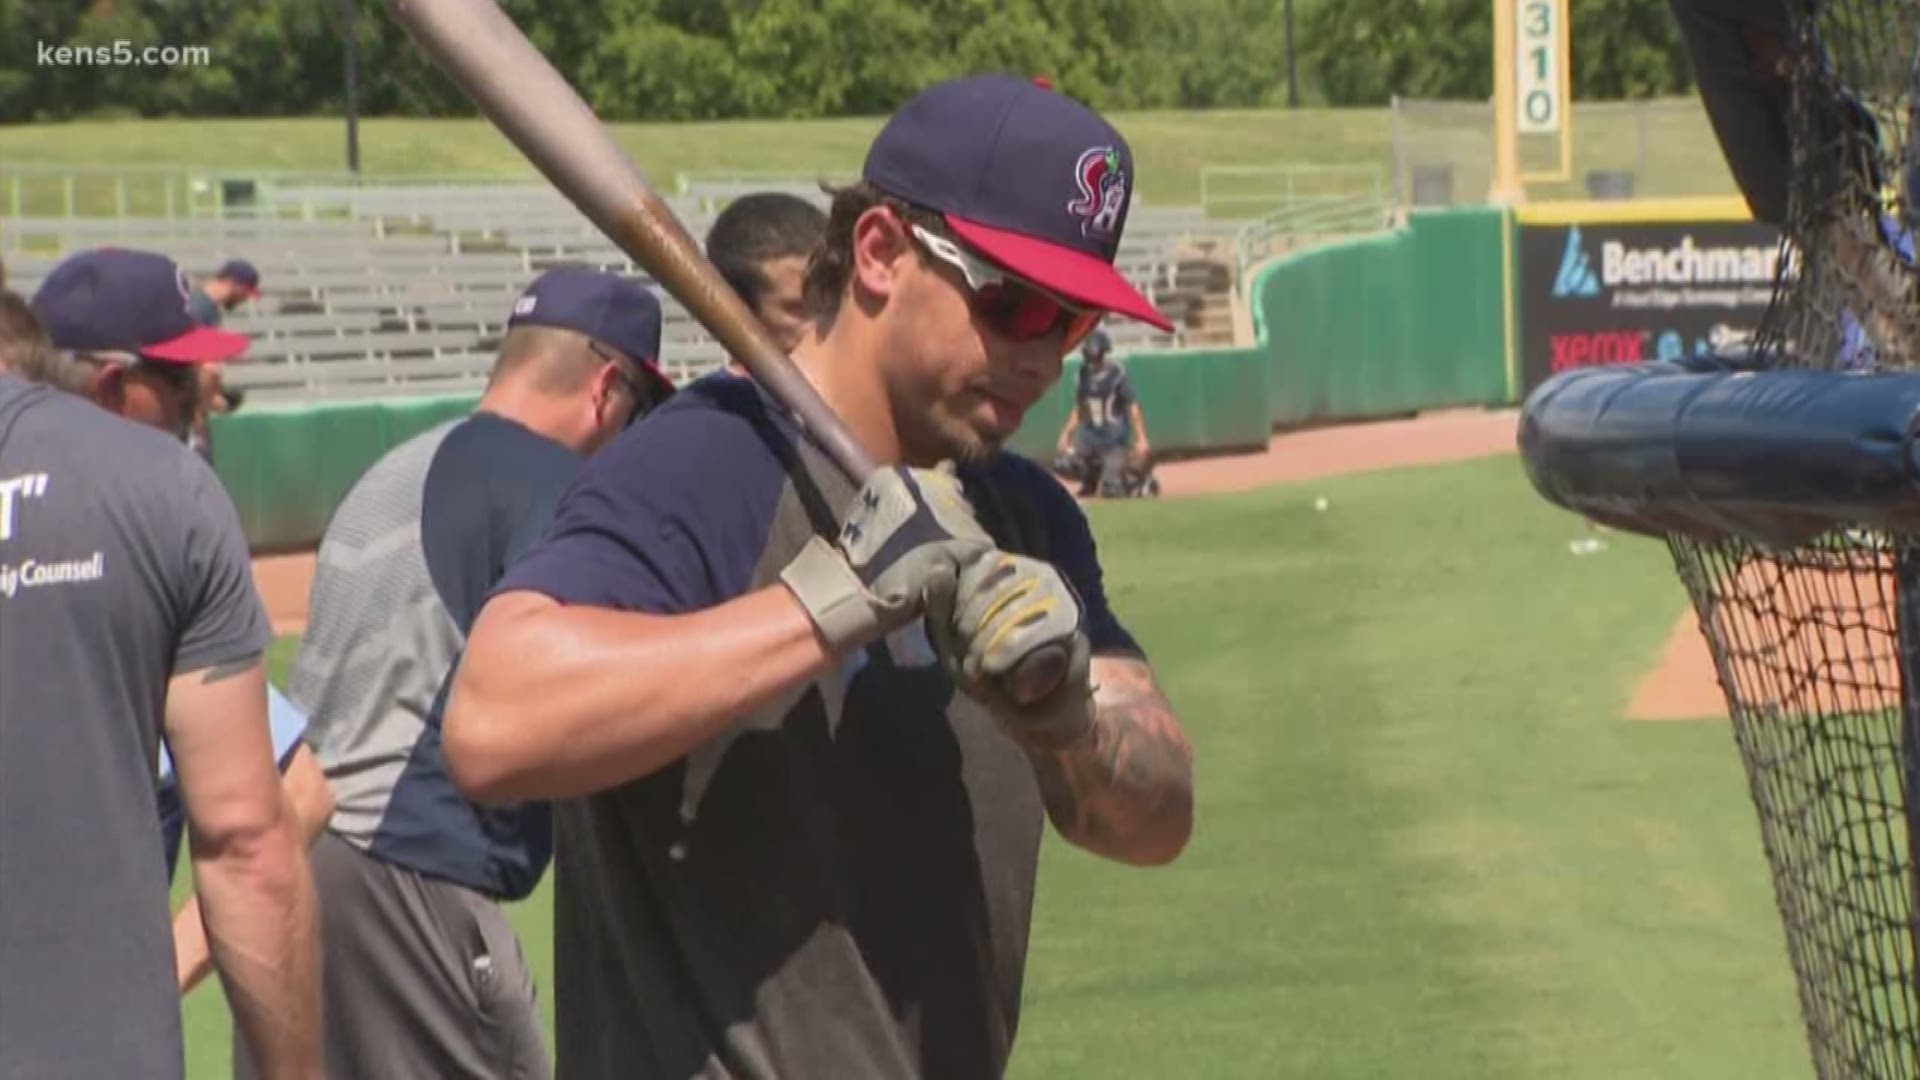 San Antonio Missions catcher Jacob Nottingham dreams of one day playing in the Major Leagues day to day. But Jacob has another life mission, one that in its own way, is bigger than baseball.